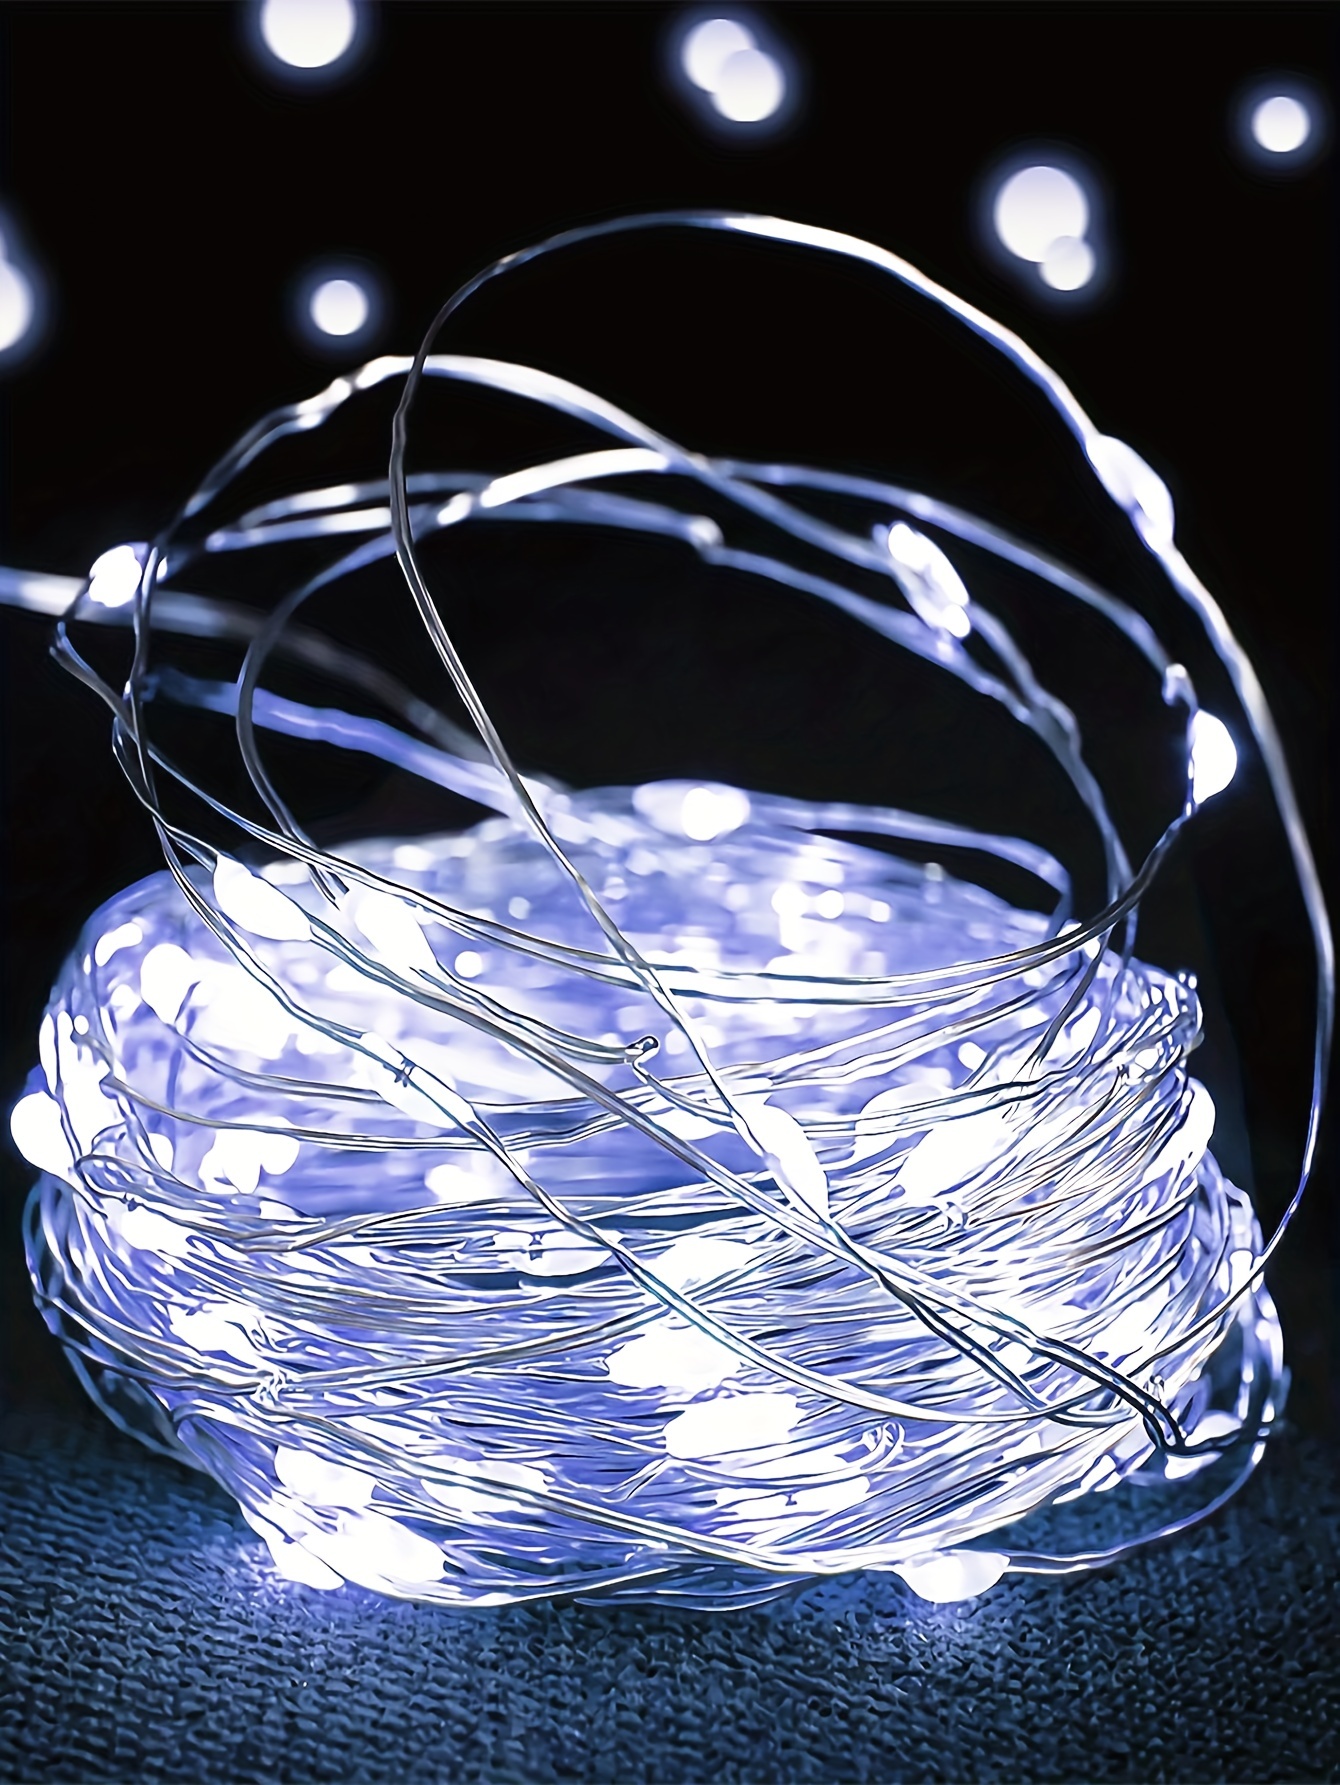 battery operated string lights, led fairy lights battery operated string lights copper wire string lights mini battery powered led lights for bedroom christmas parties wedding centerpiece decoration details 11